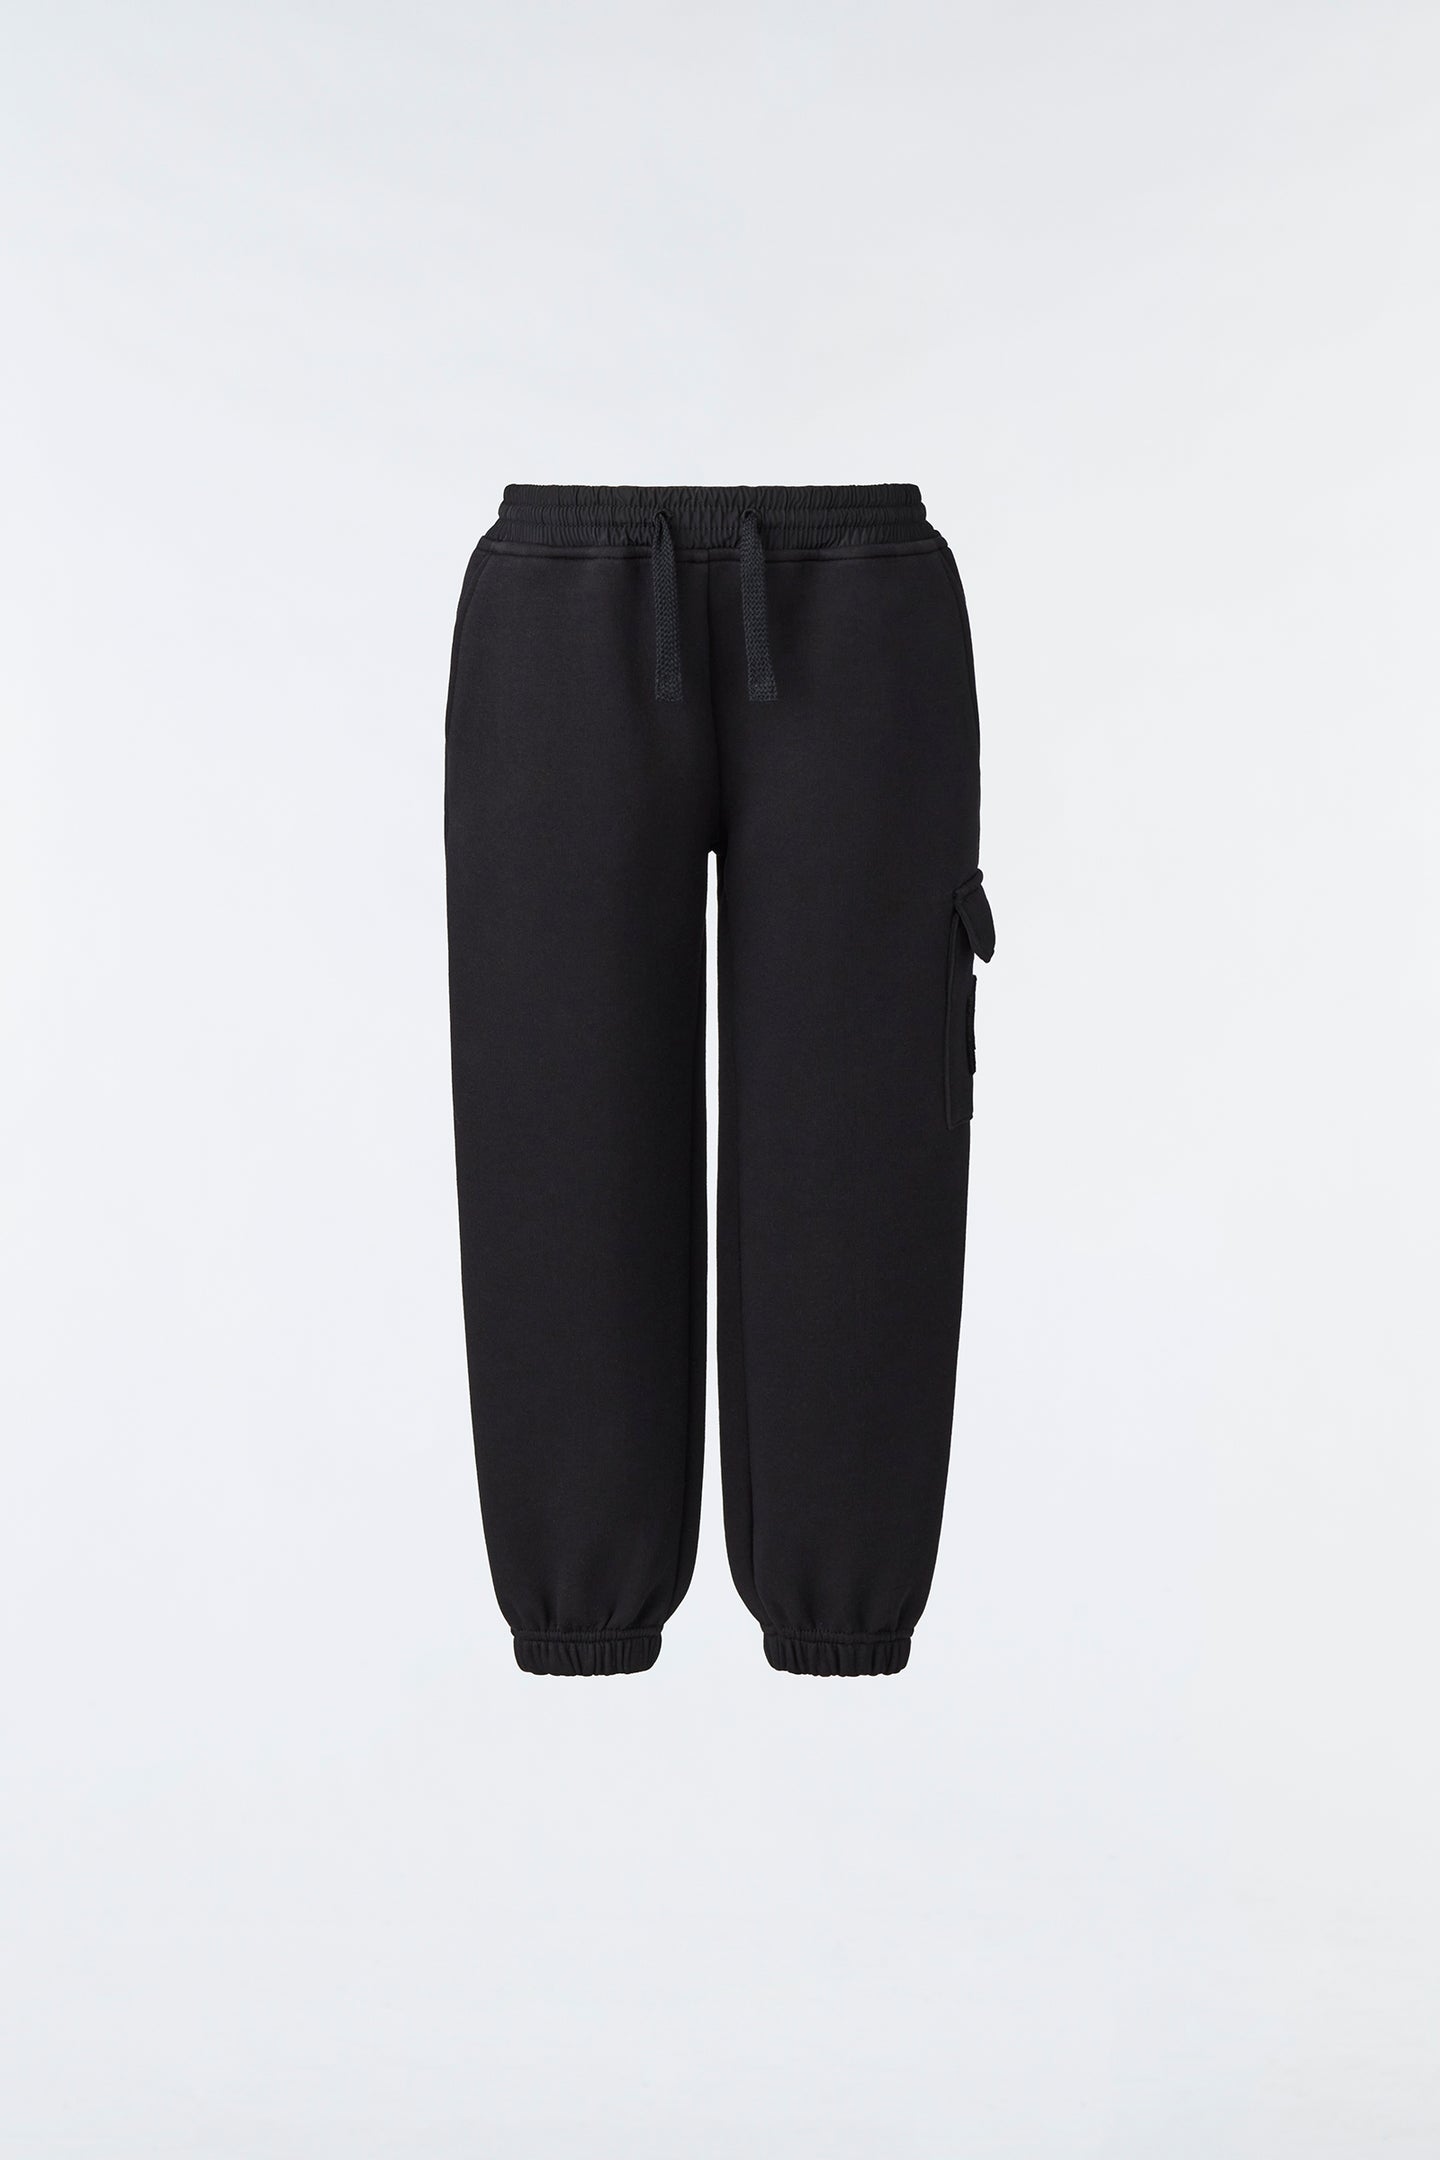 TRACKSUIT PANTS IN DOUBLE FACE JERSEY - BLACK / WHITE